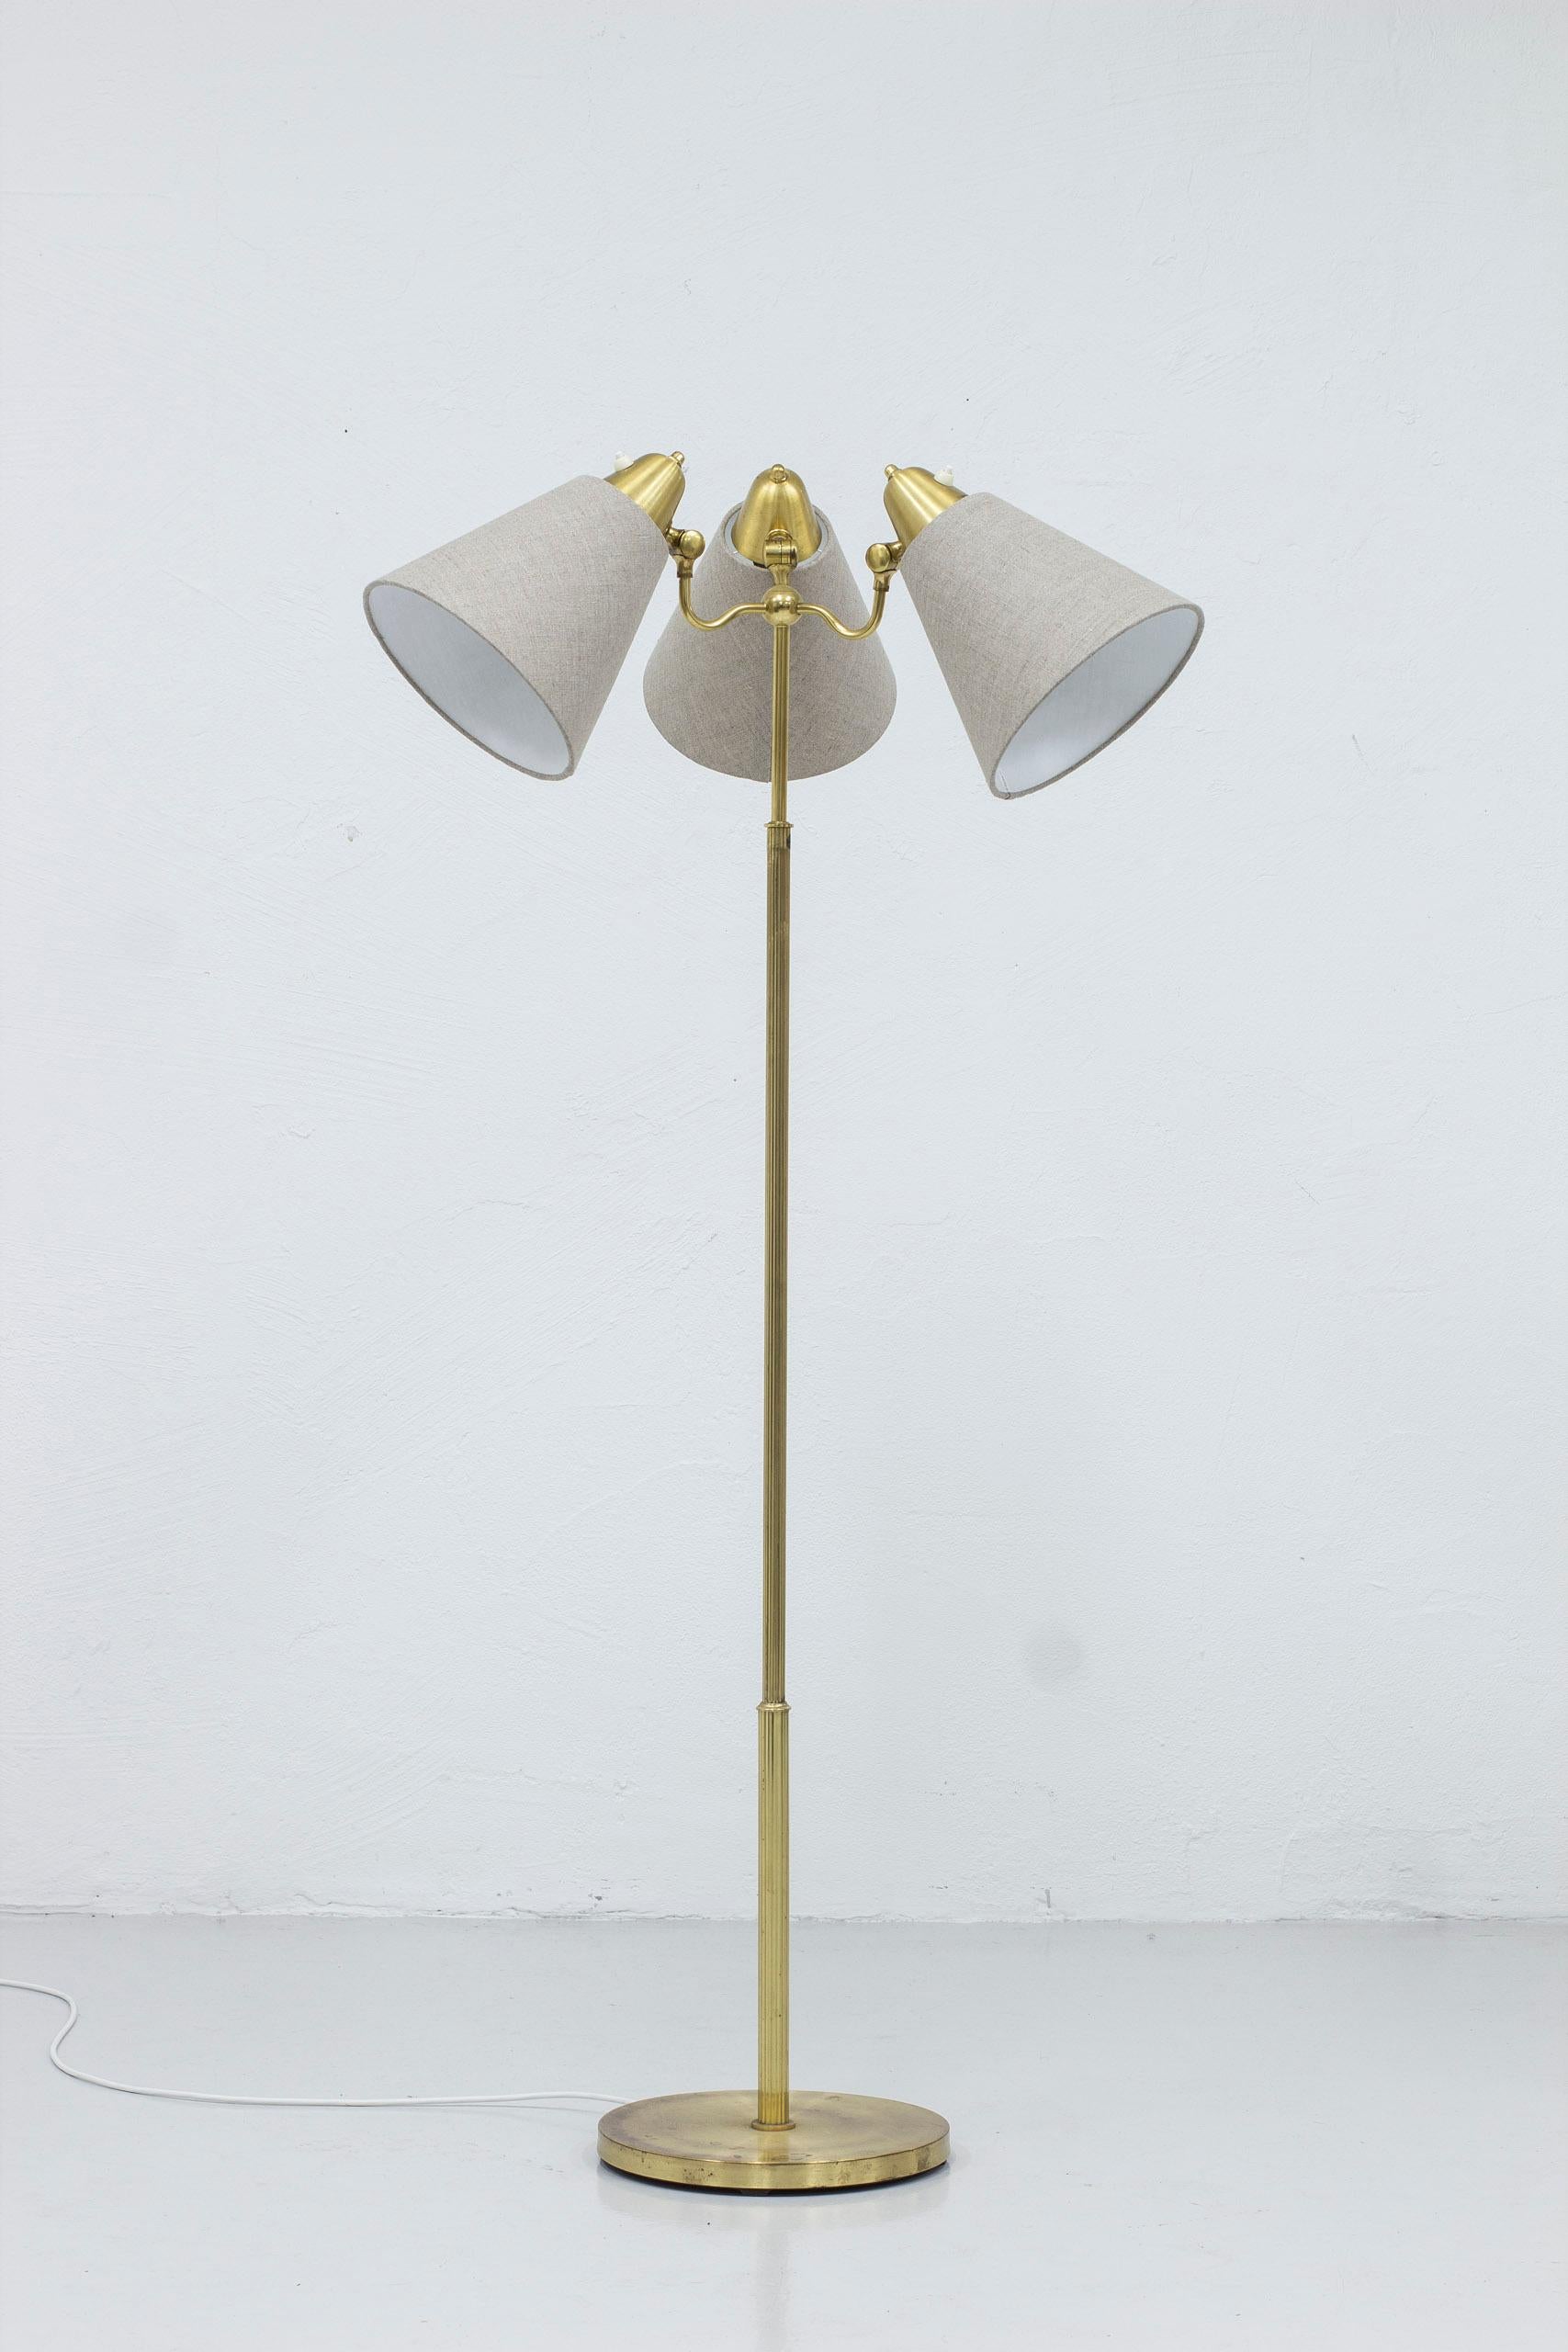 Floor lamp model 324 produced by Armaturhantverk. Made in Göteborg, Sweden during the 1940s. Made from brass with three adjustable shades. New lamp shades in grey linen fabric Light switches on all three lamps in working order. Good vintage